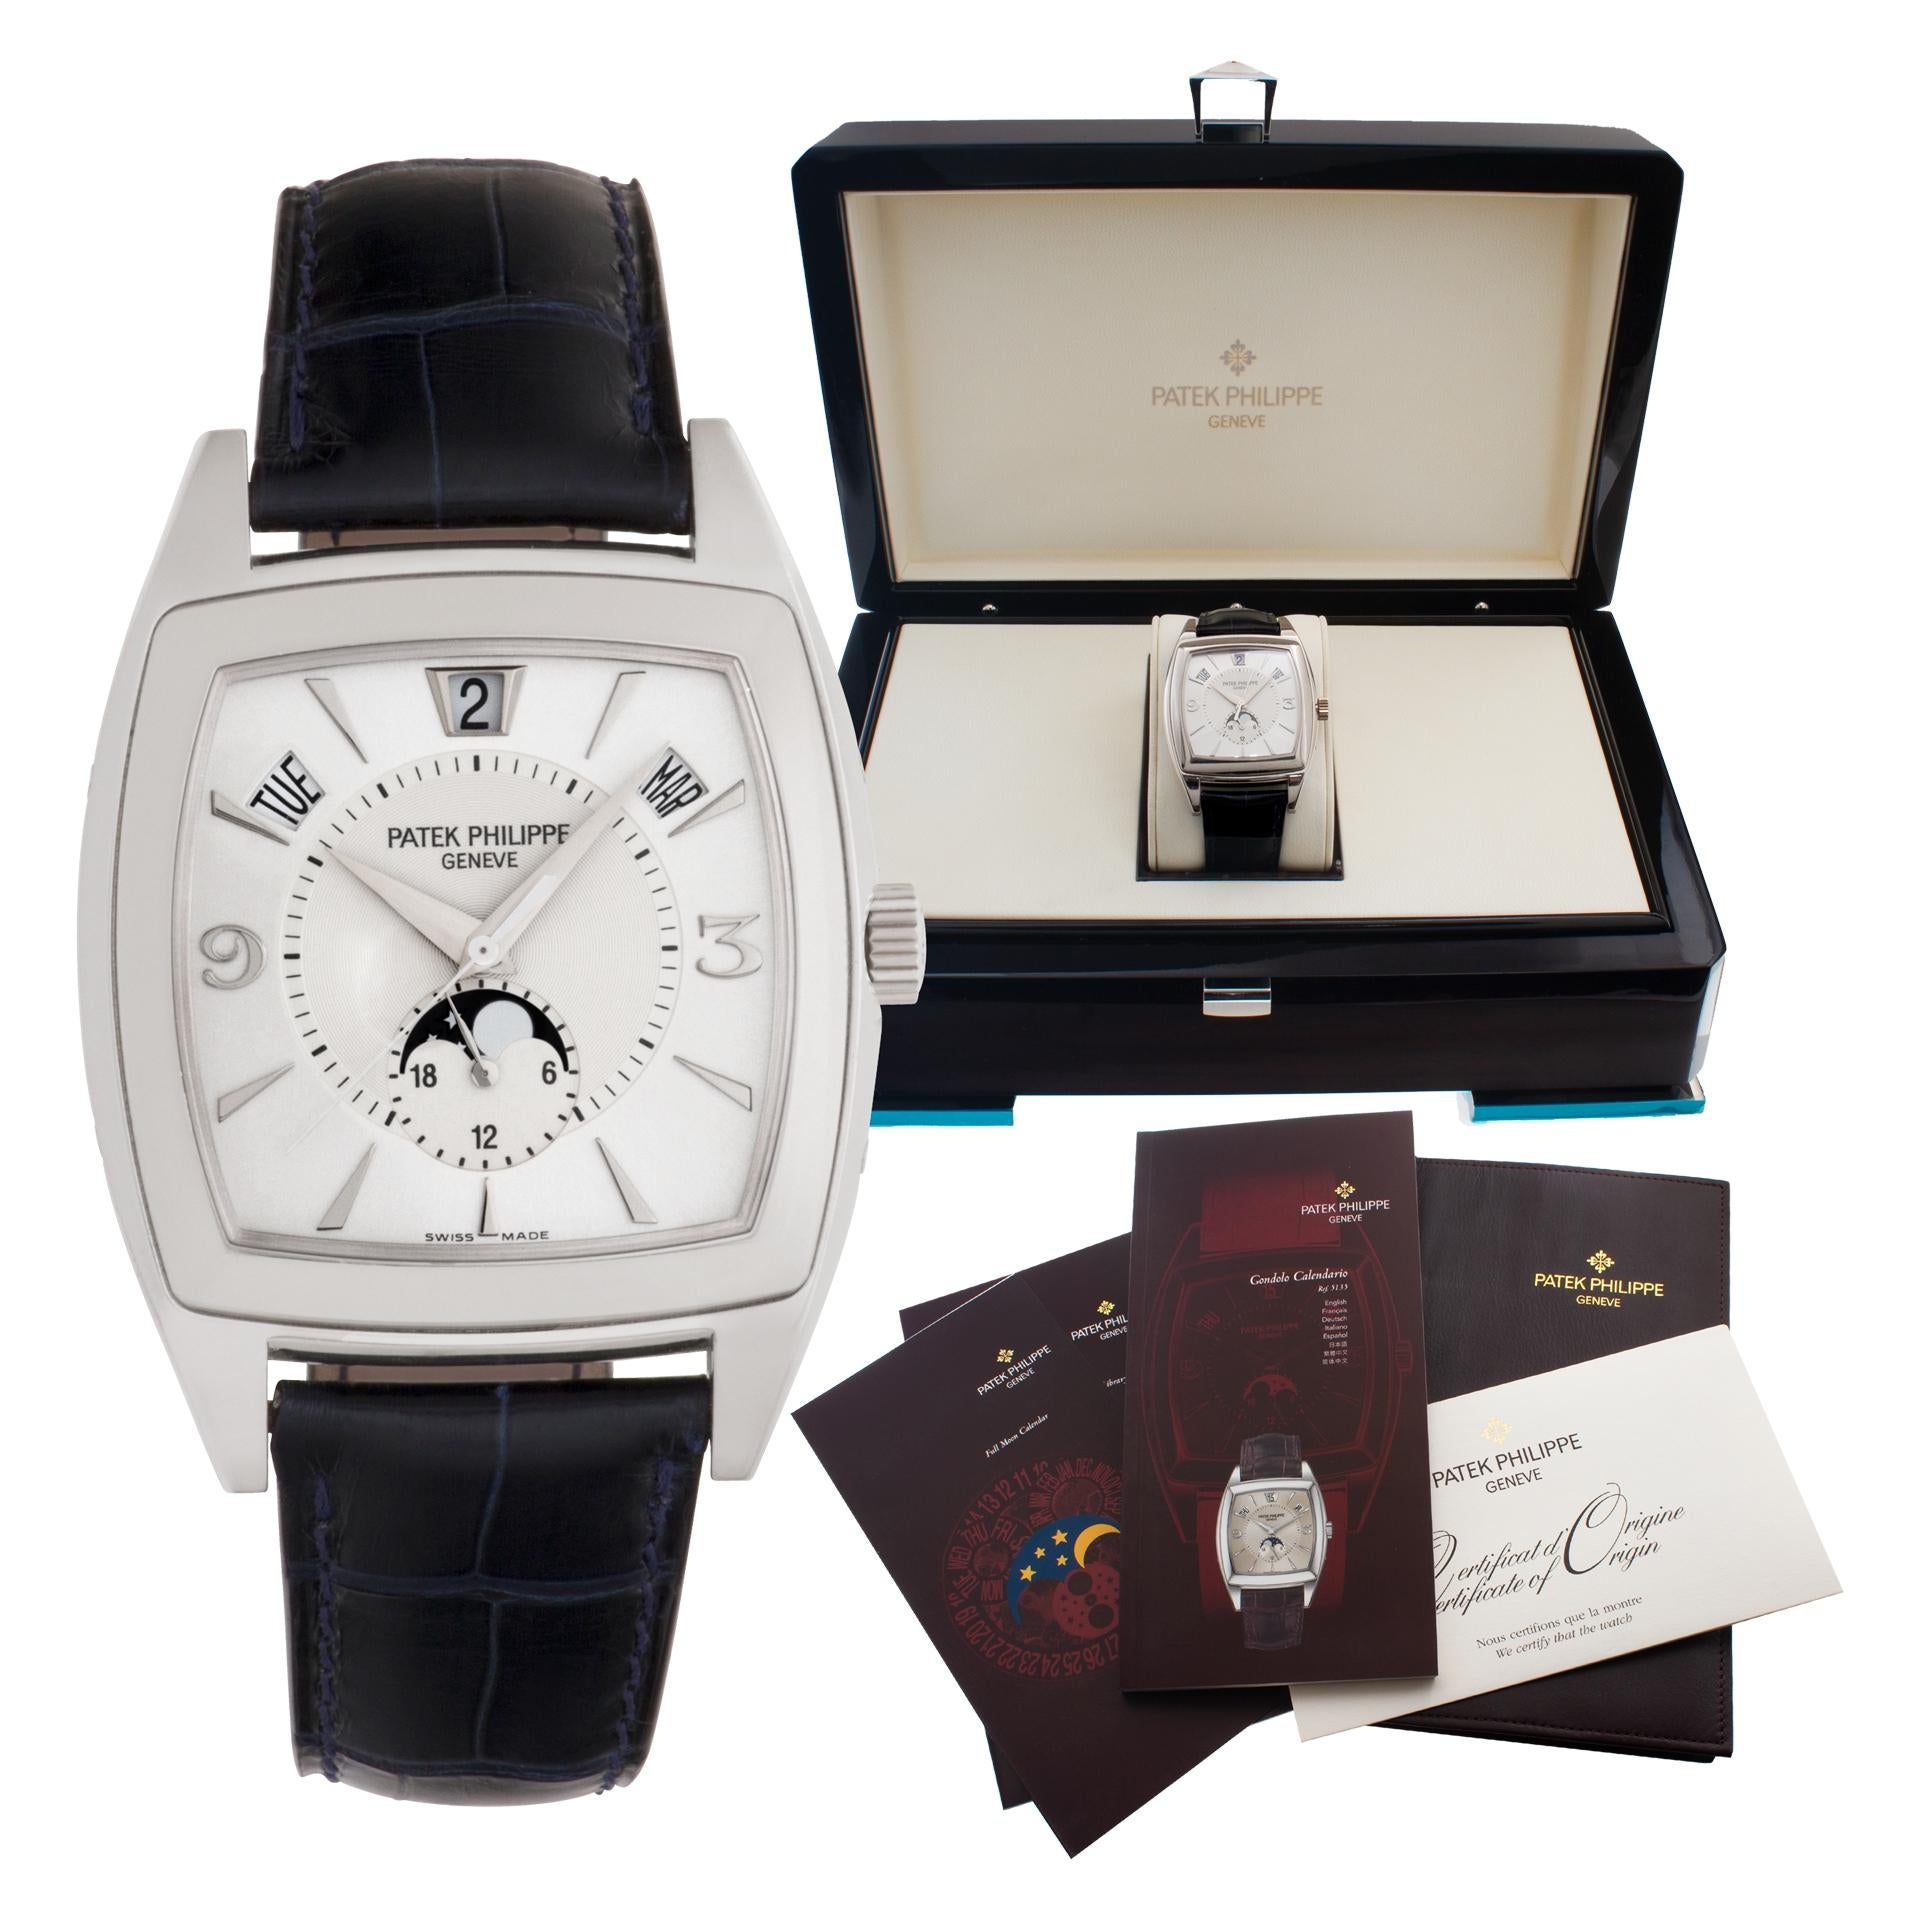  ESTIMATED RETAIL: $46,000.00      YOUR PRICE: $37,750.00

Patek Philippe Gondolo in 18k white gold on an original Patek navy alligator strap with a PP tang buckle. Automatic with sweep seconds, date, day and month. 38 x 39 mm case size. With